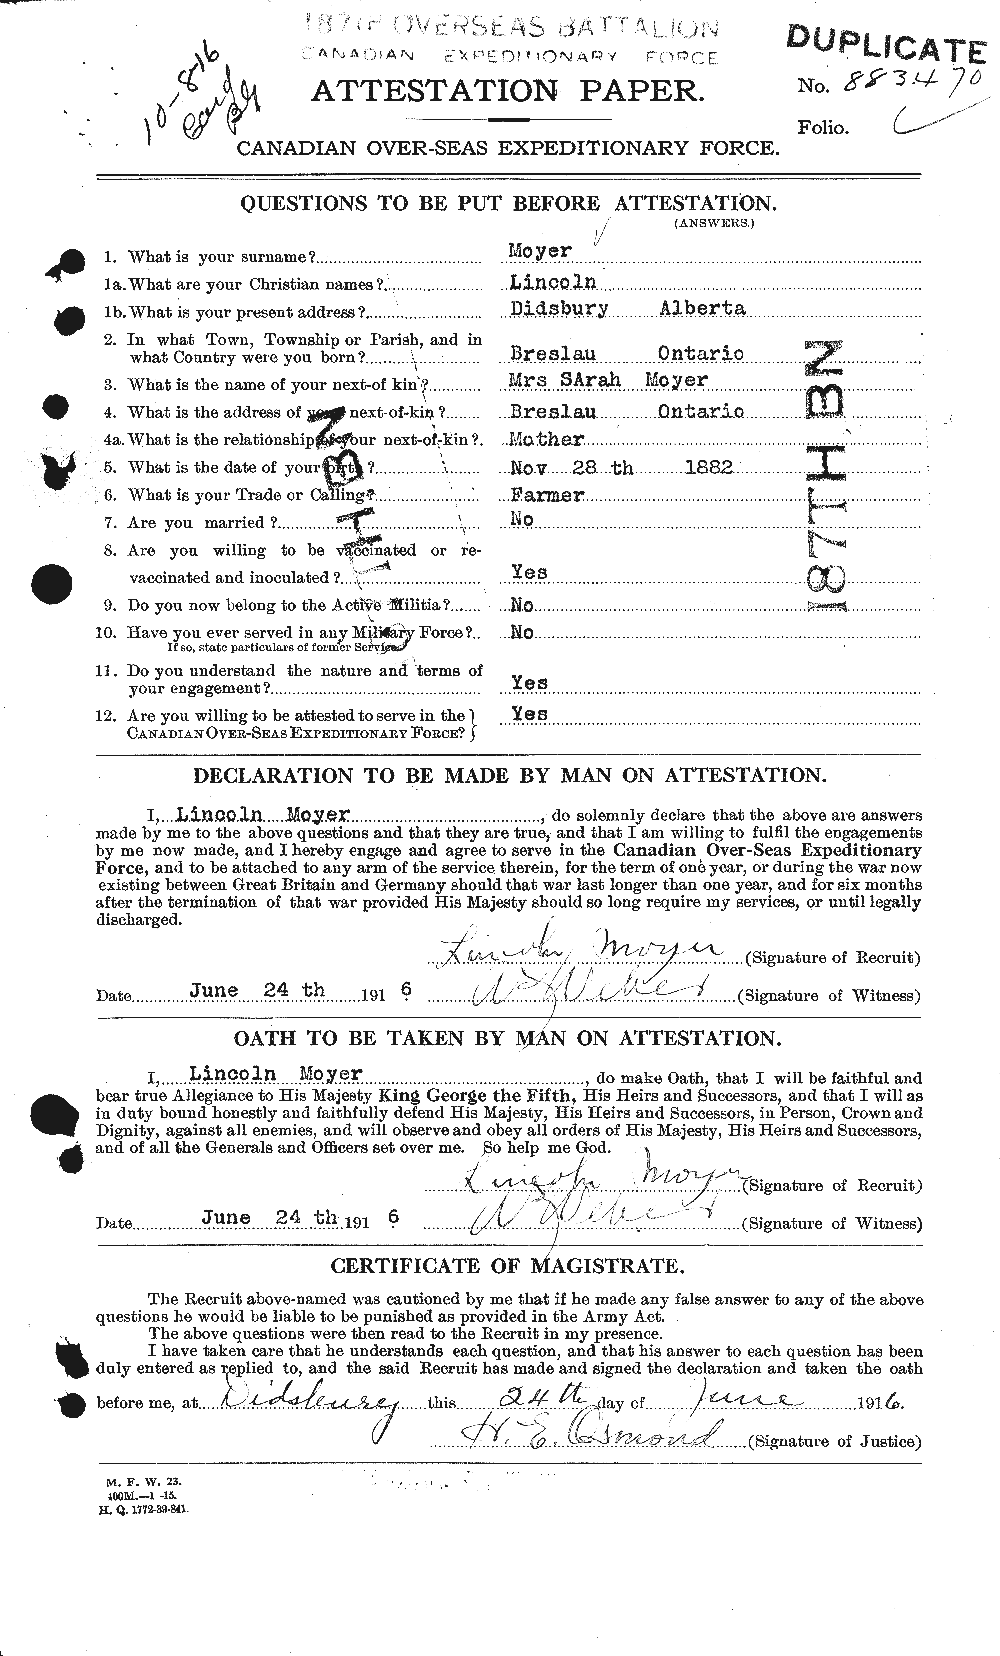 Personnel Records of the First World War - CEF 512851a